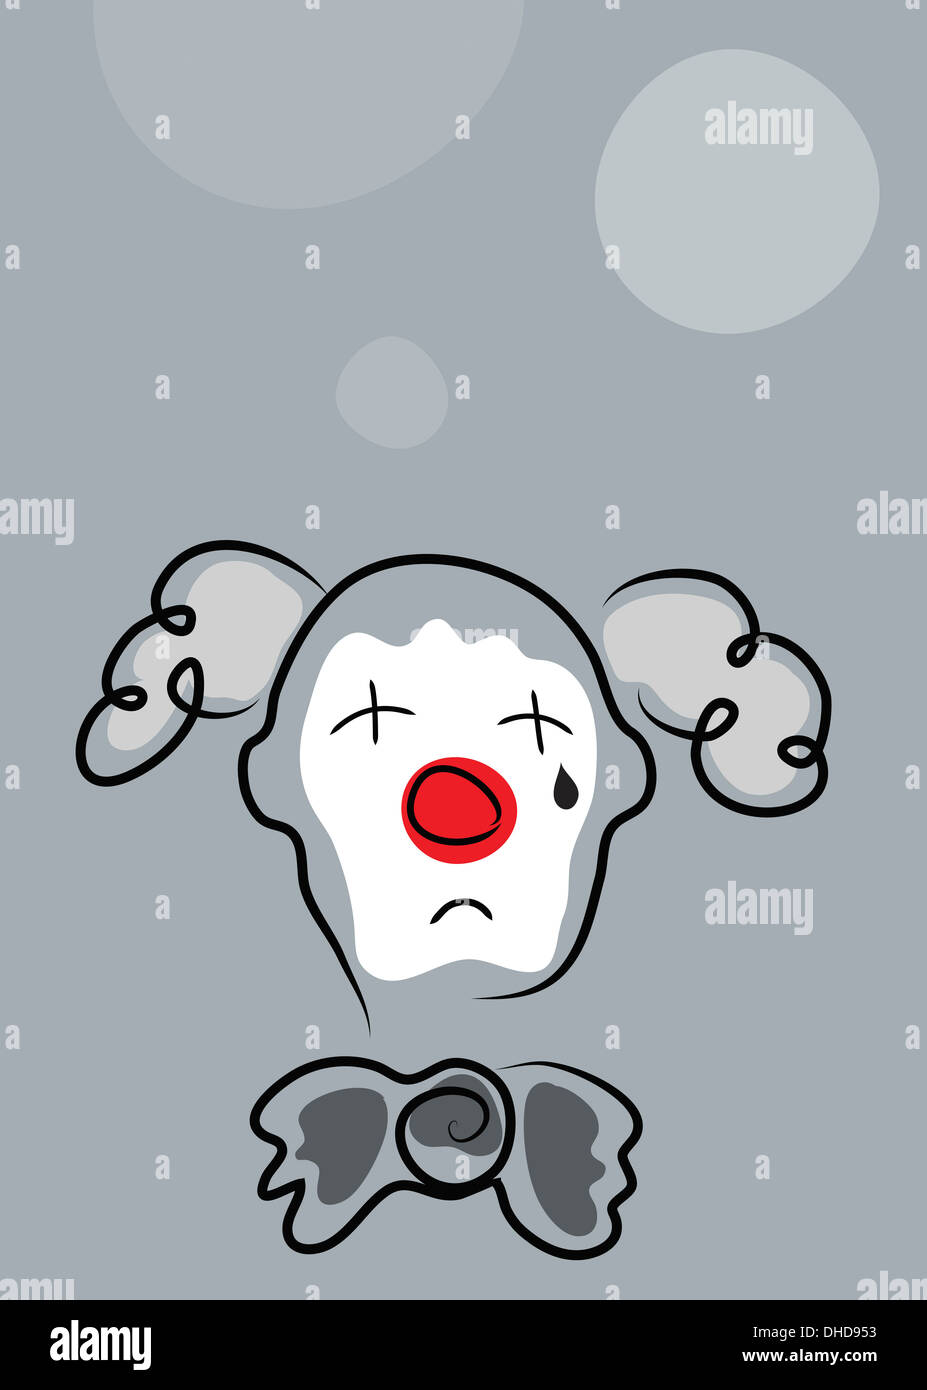 Sad clown with white face mask and red nose on gray background Stock Photo